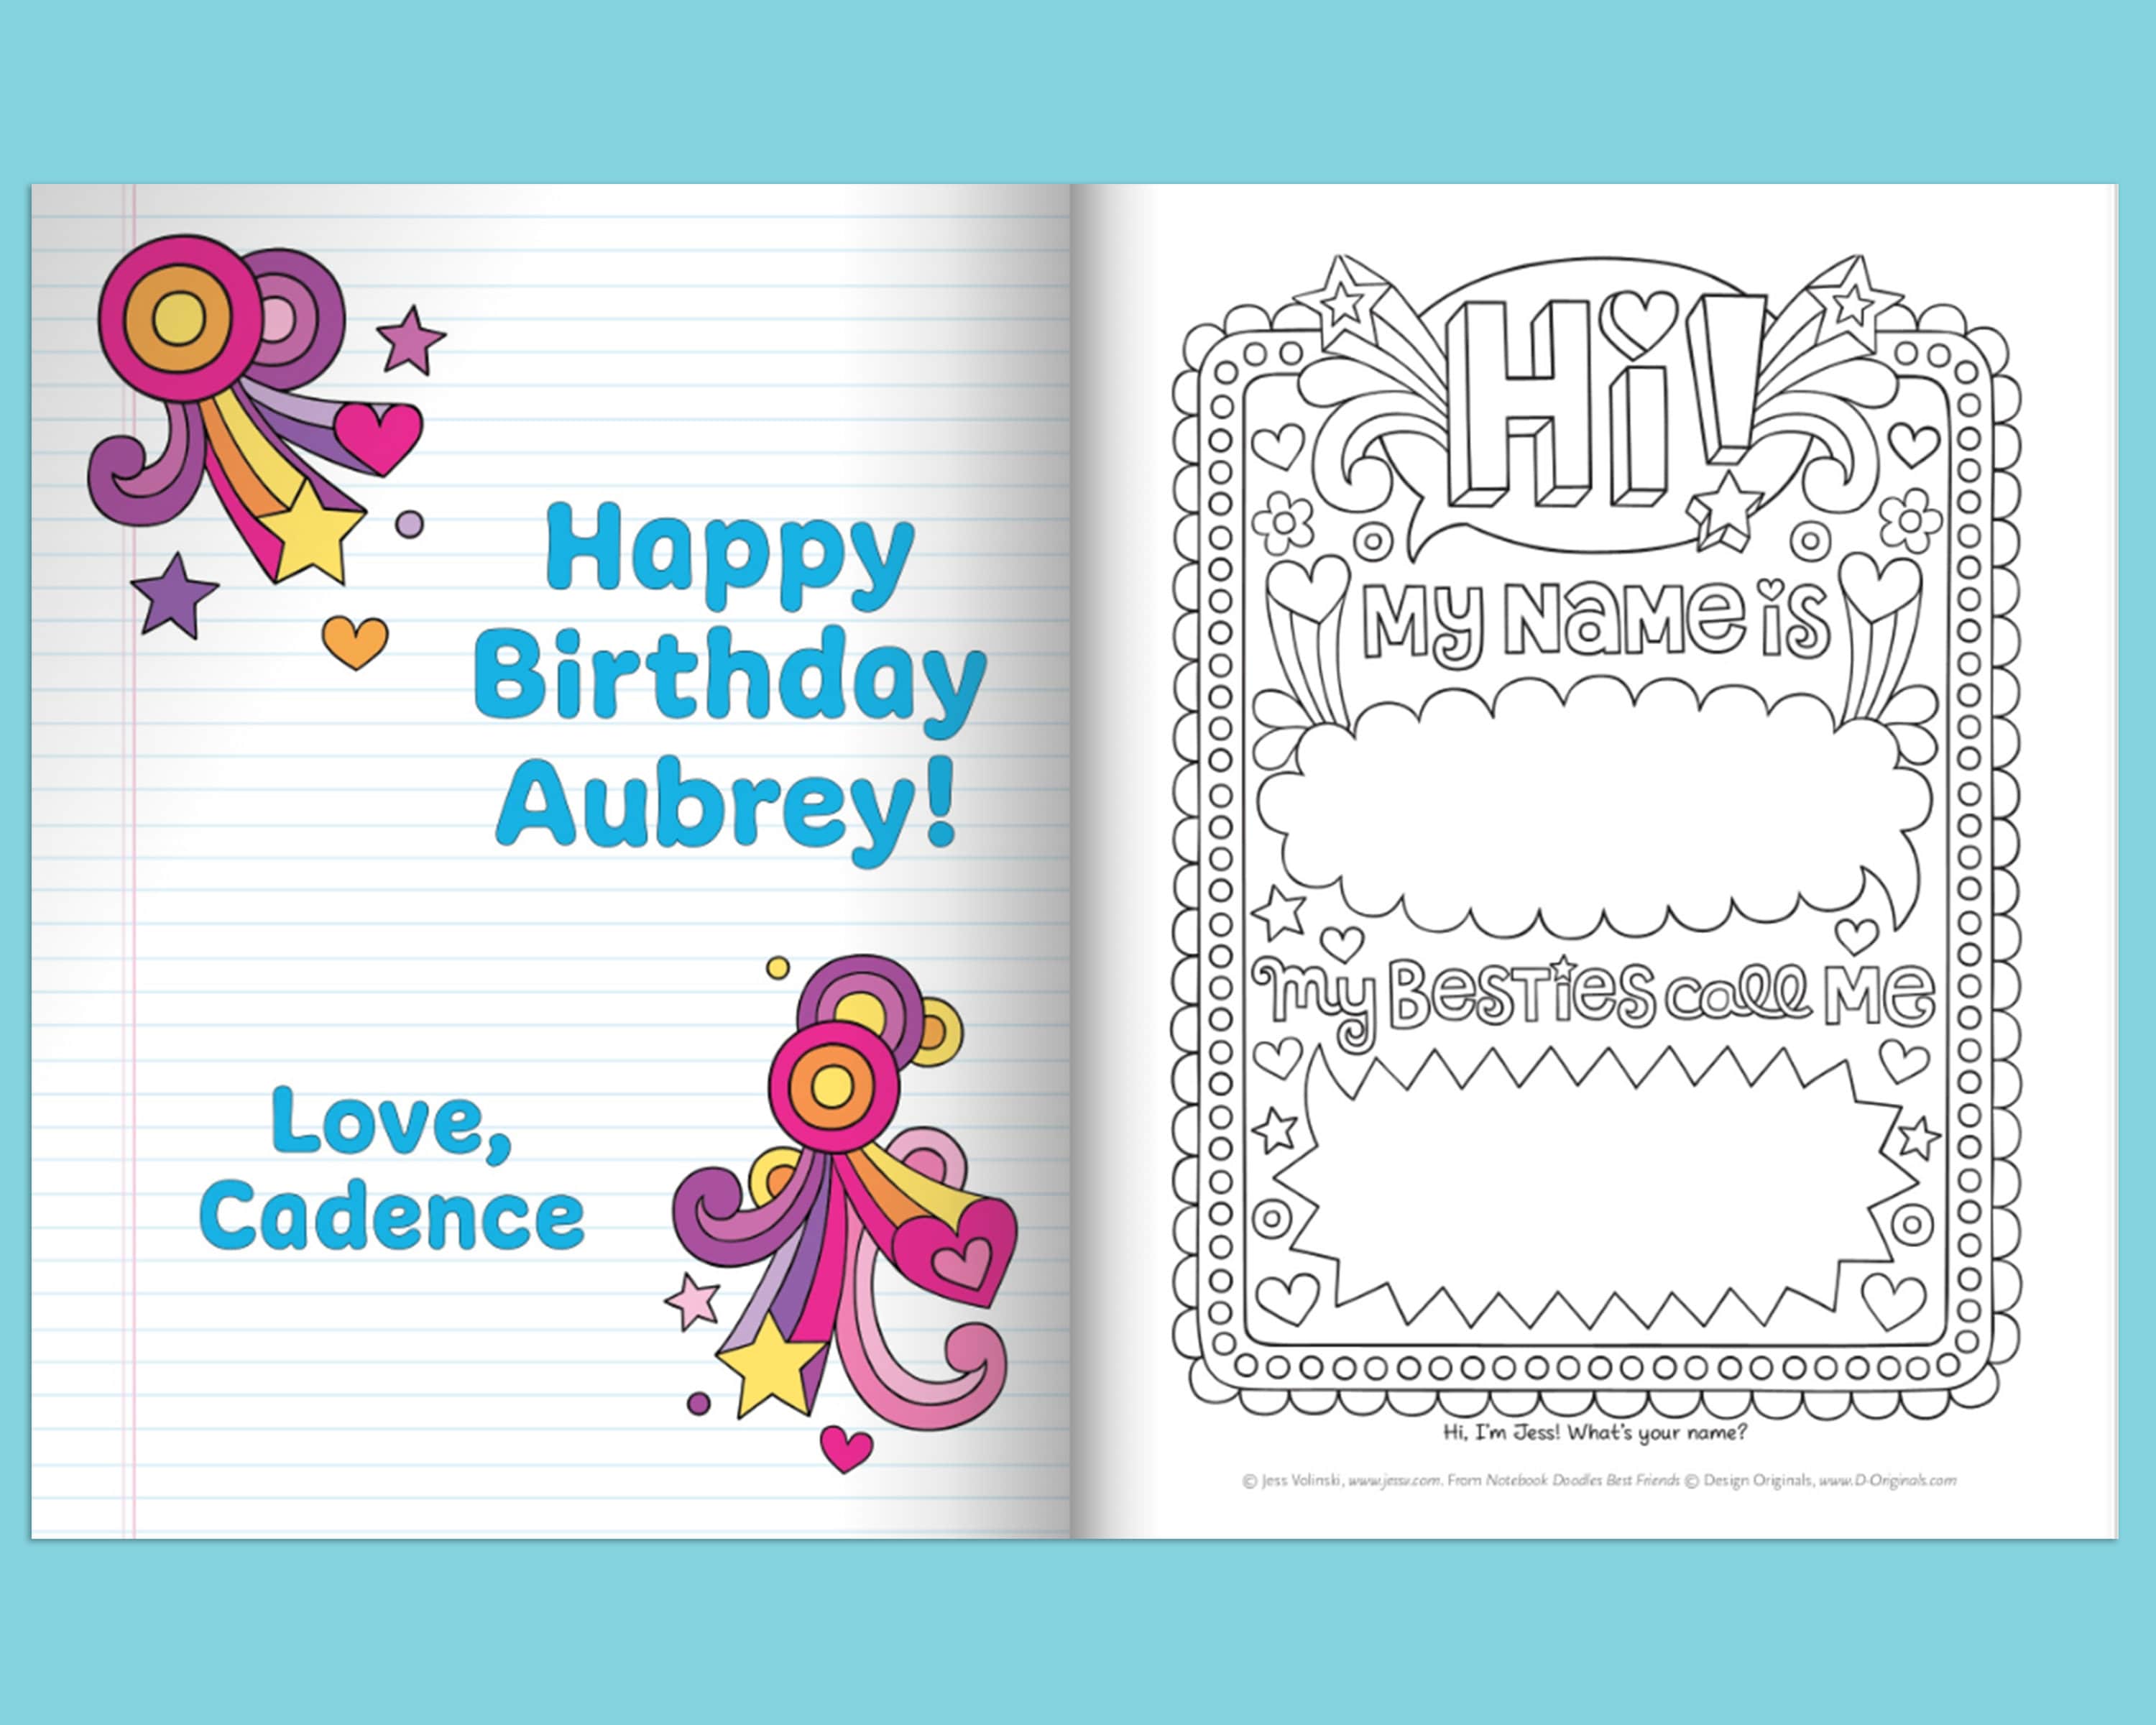 Andrew's Birthday Coloring Book Kids Personalized Books: A Coloring Book Personalized for Andrew That Includes Children's Cut Out Happy Birthday Posters [Book]